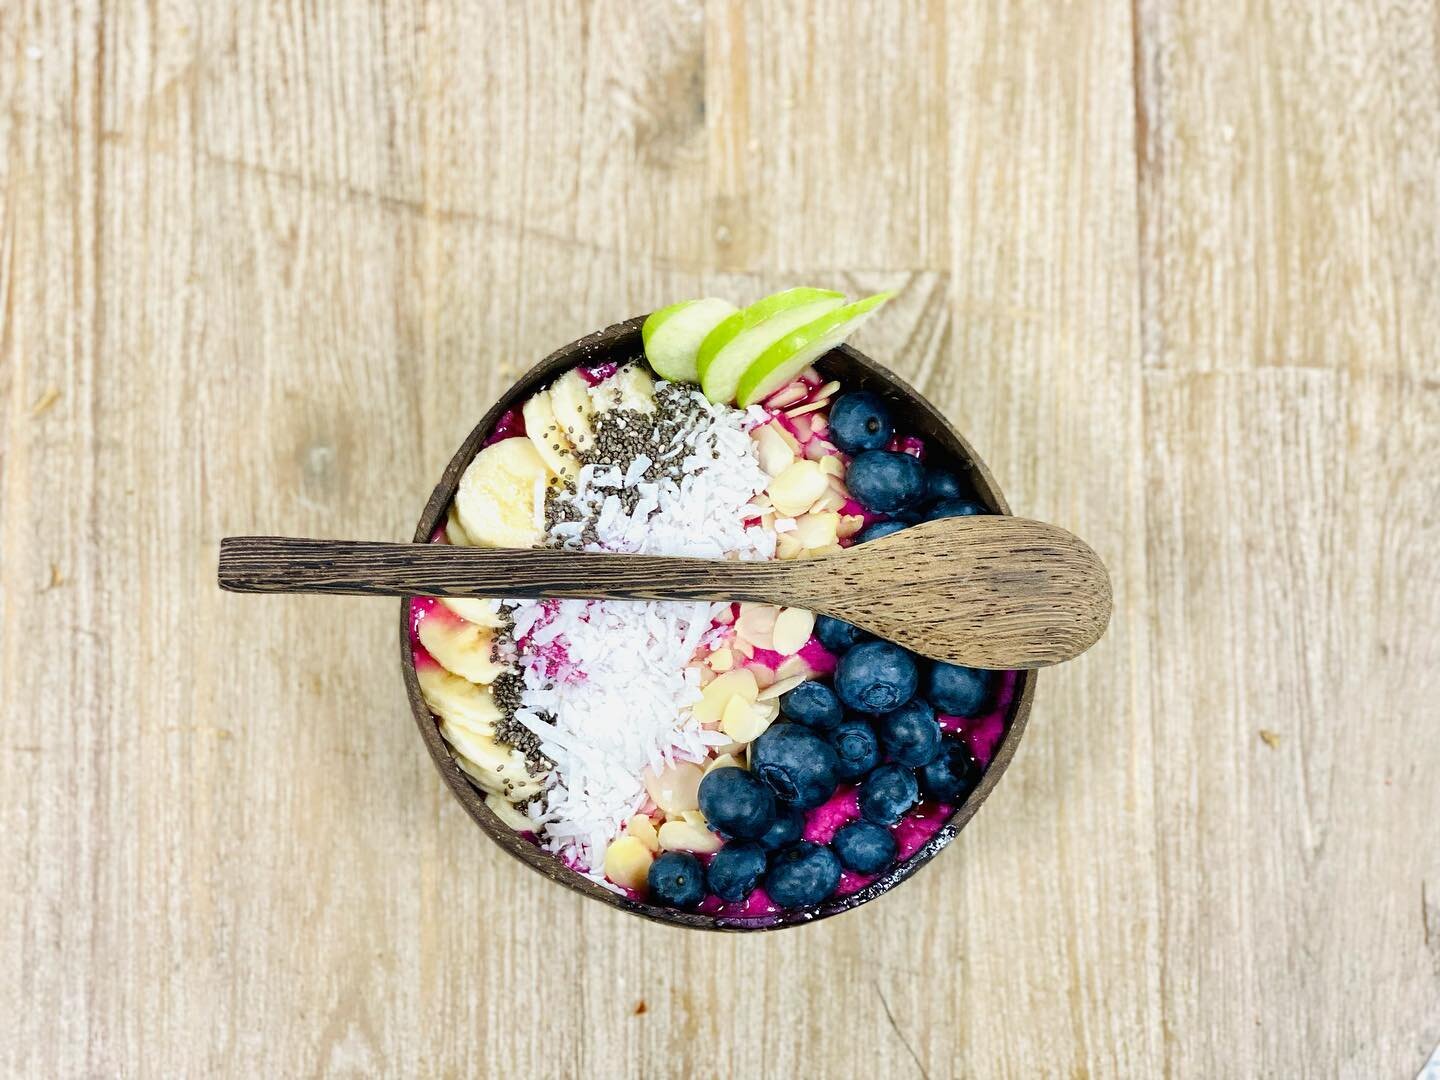 Our staff were experimenting this weekend&hellip; the Pink Dragon Bowl 🐉 plus we were gifted some local blueberries 🫐 yummm! 

#dragonbowl #smoothiebowl #ilukasummervibes #brunch #yyjeats #pinkpataya #dragonfruit